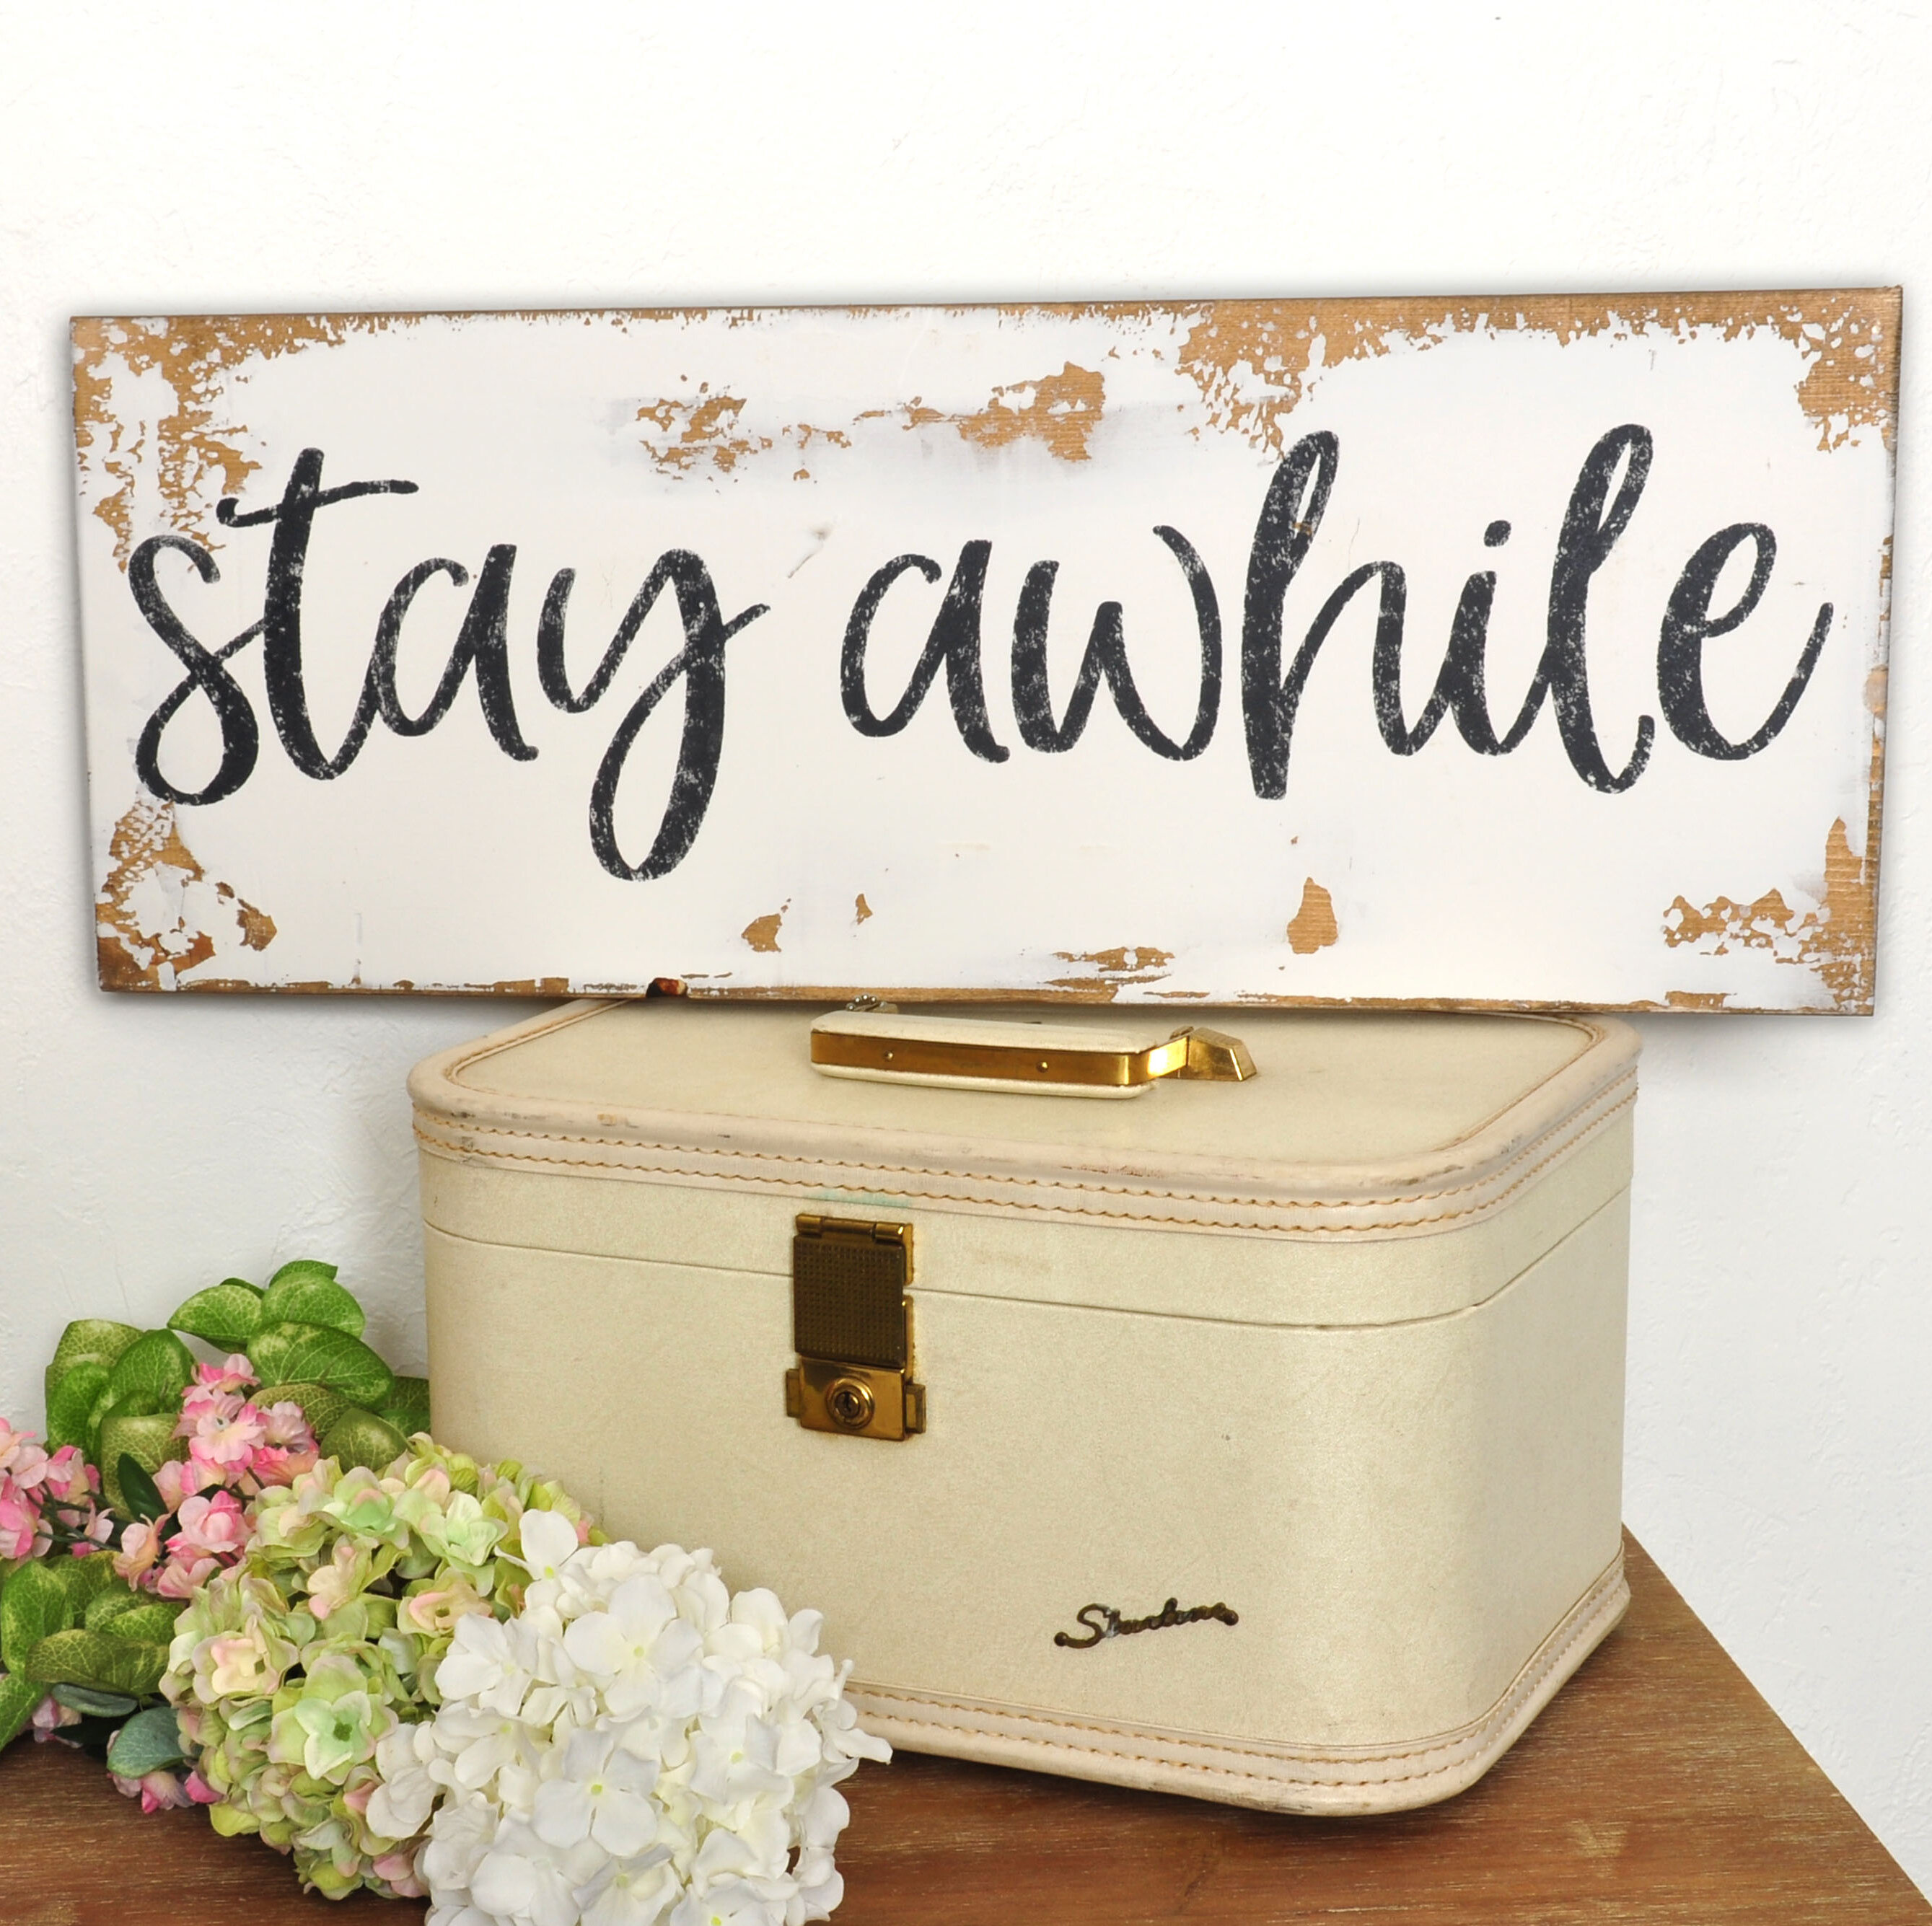 Stay Awhile -Ish Hand Painted Farmhouse Sign Housewarming Gift | Home Decor Rustic Home Funny Sign